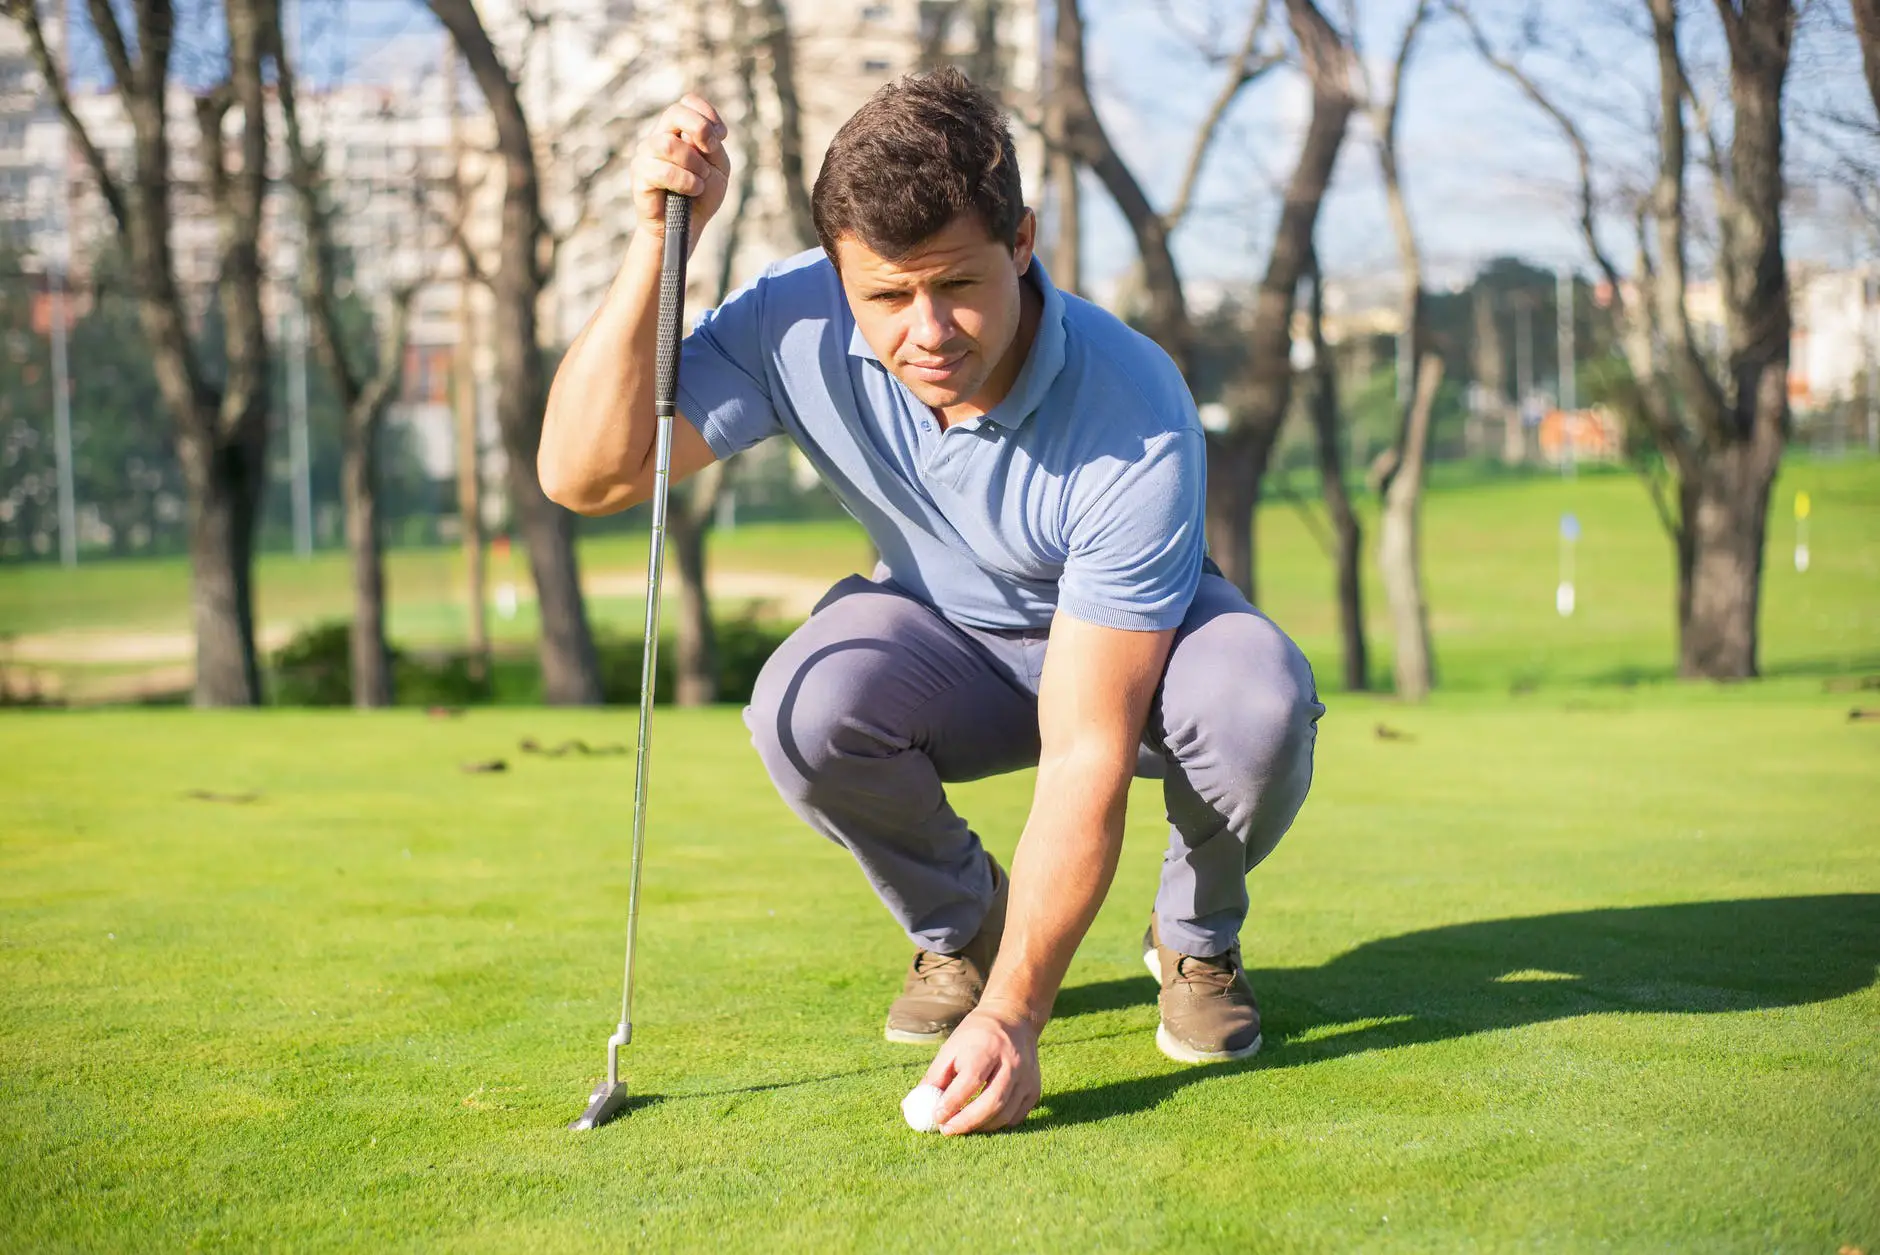 a man sitting on green grass while holding a golf club and a ball